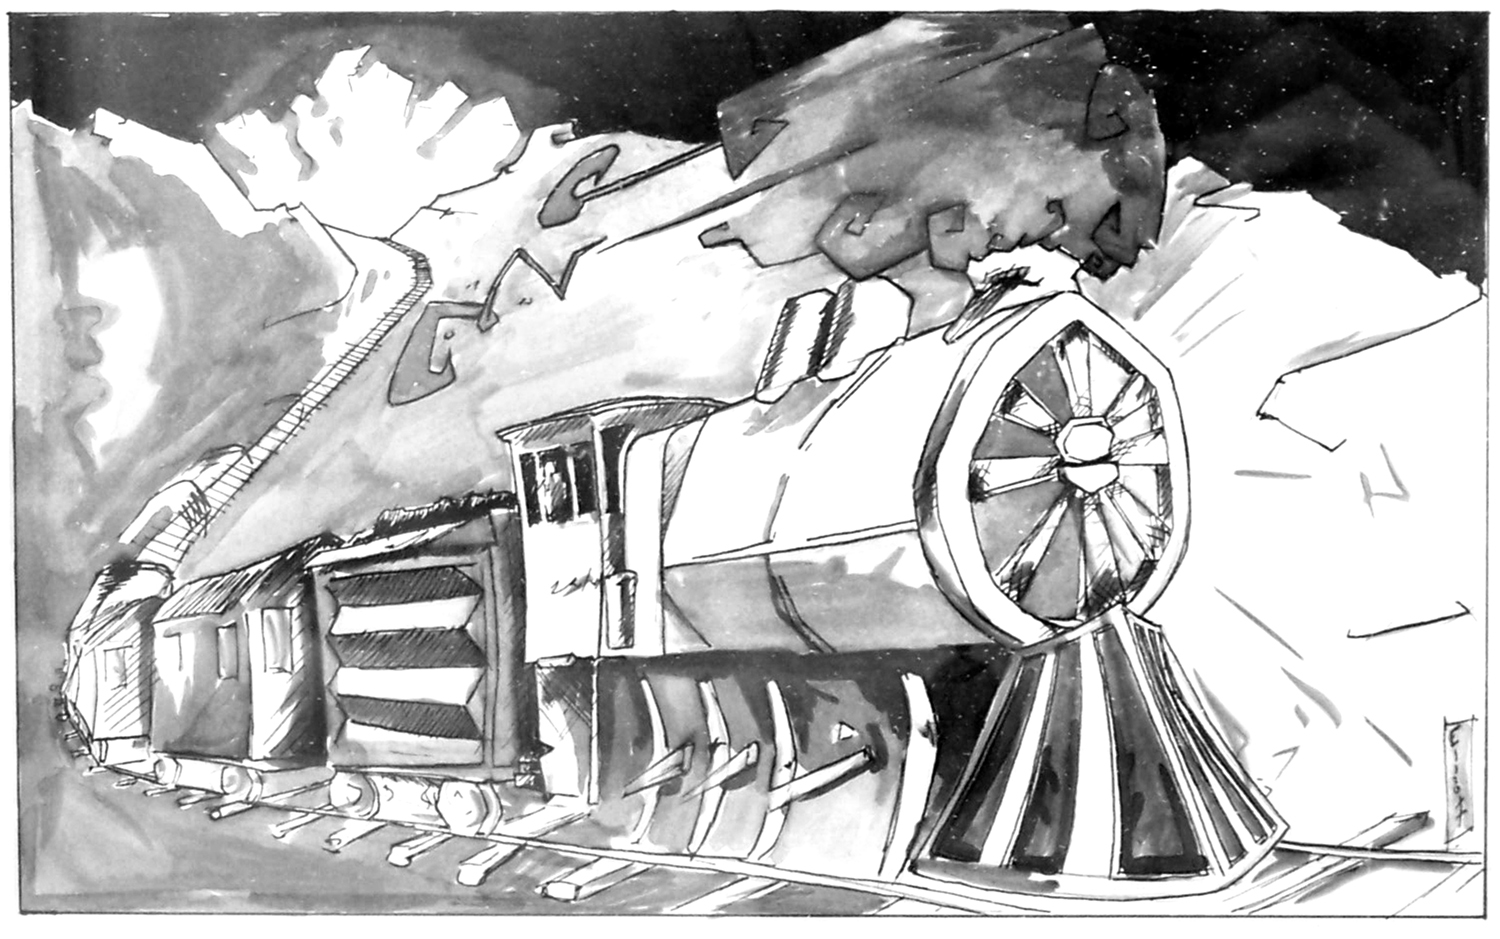 Black and white pen & ink version of the painting of Casey Jones' freight train, the Cannonball Express, in an explosion as the trail derails. Photo credit: Lucas Elliott